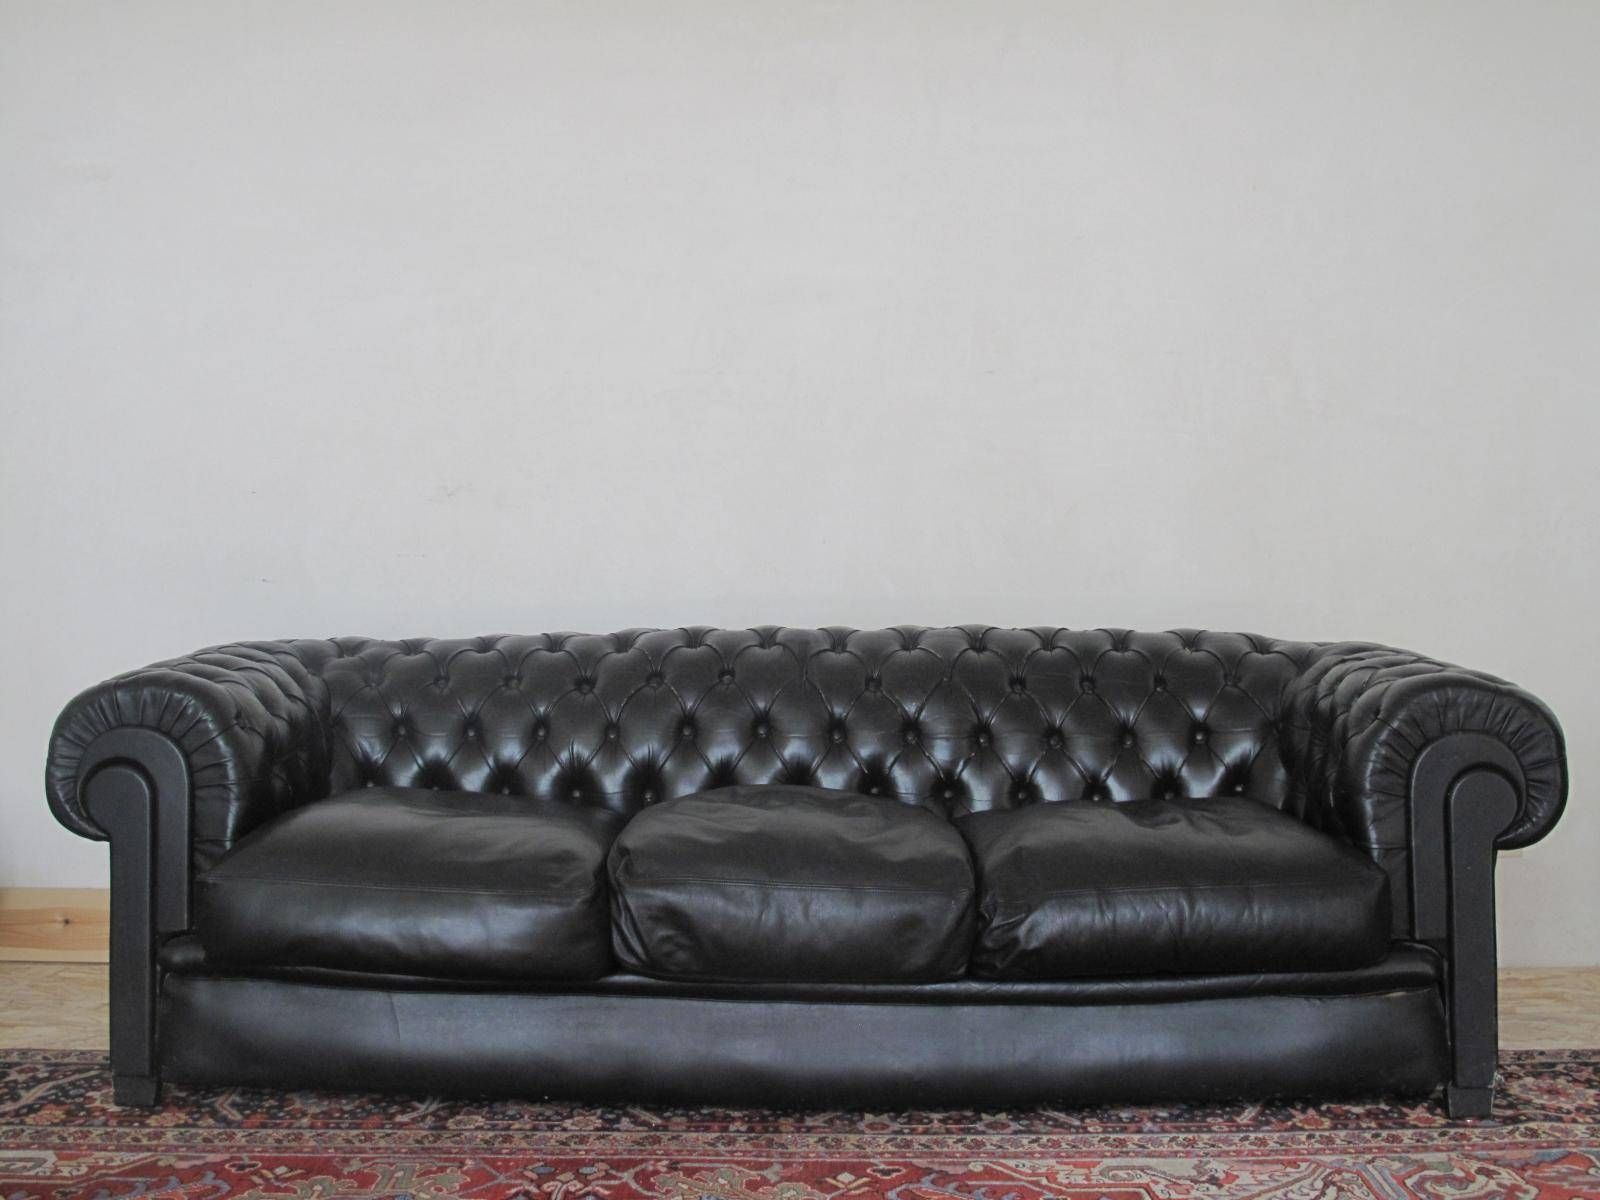 Three Seater Black Leather Chesterfield Sofa, 1970s For Sale At Pamono Within Chesterfield Black Sofas (View 23 of 30)